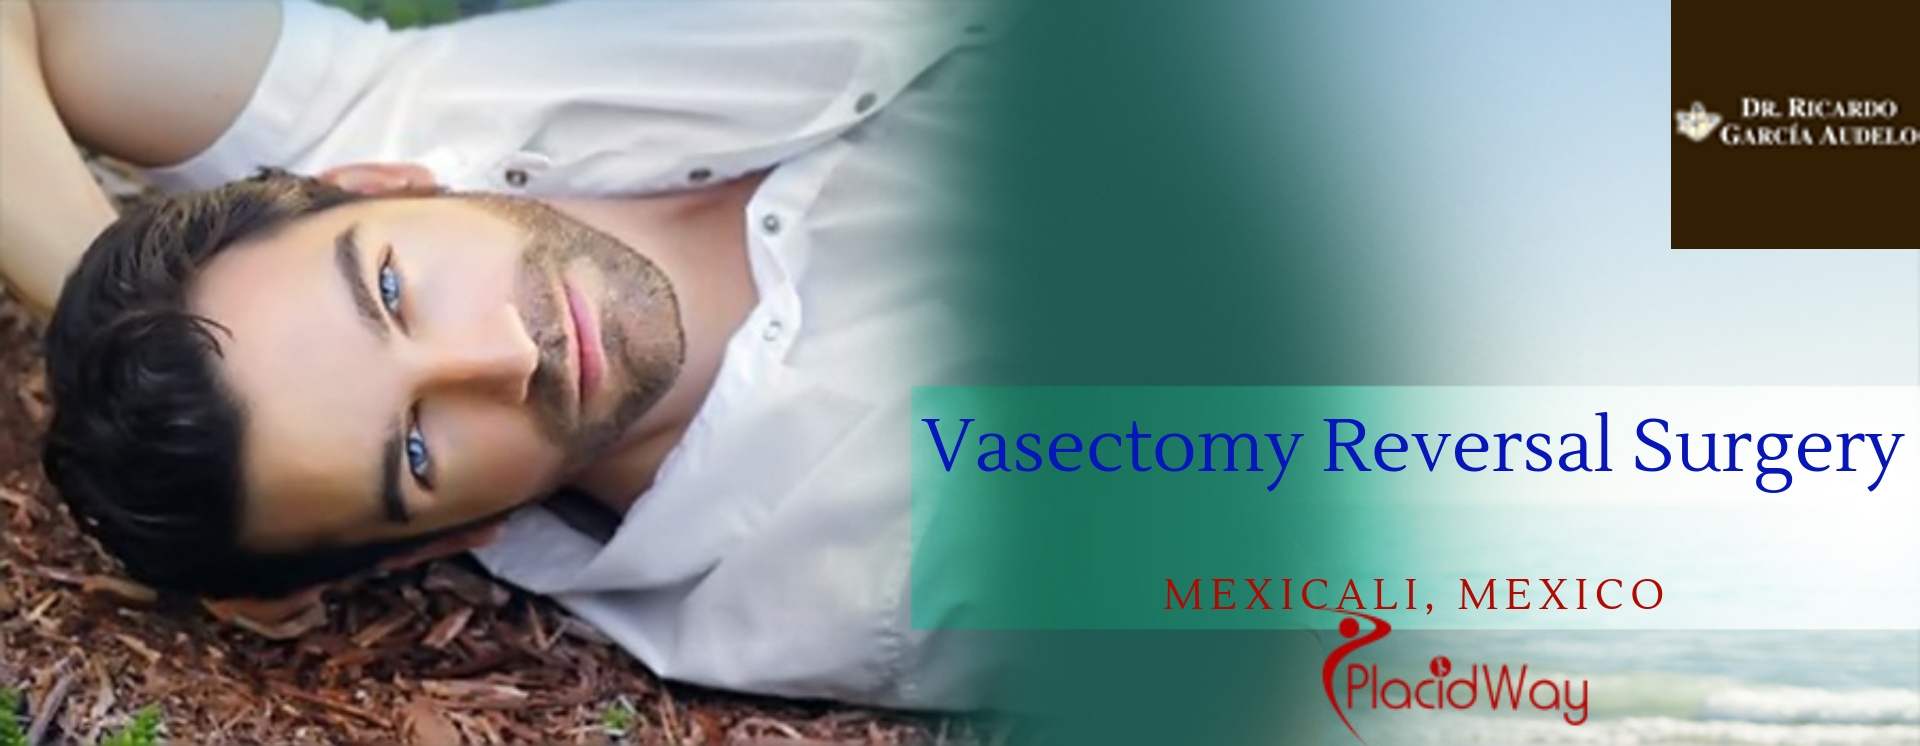 Vasectomy Reversal Surgery in Mexicali, Mexico